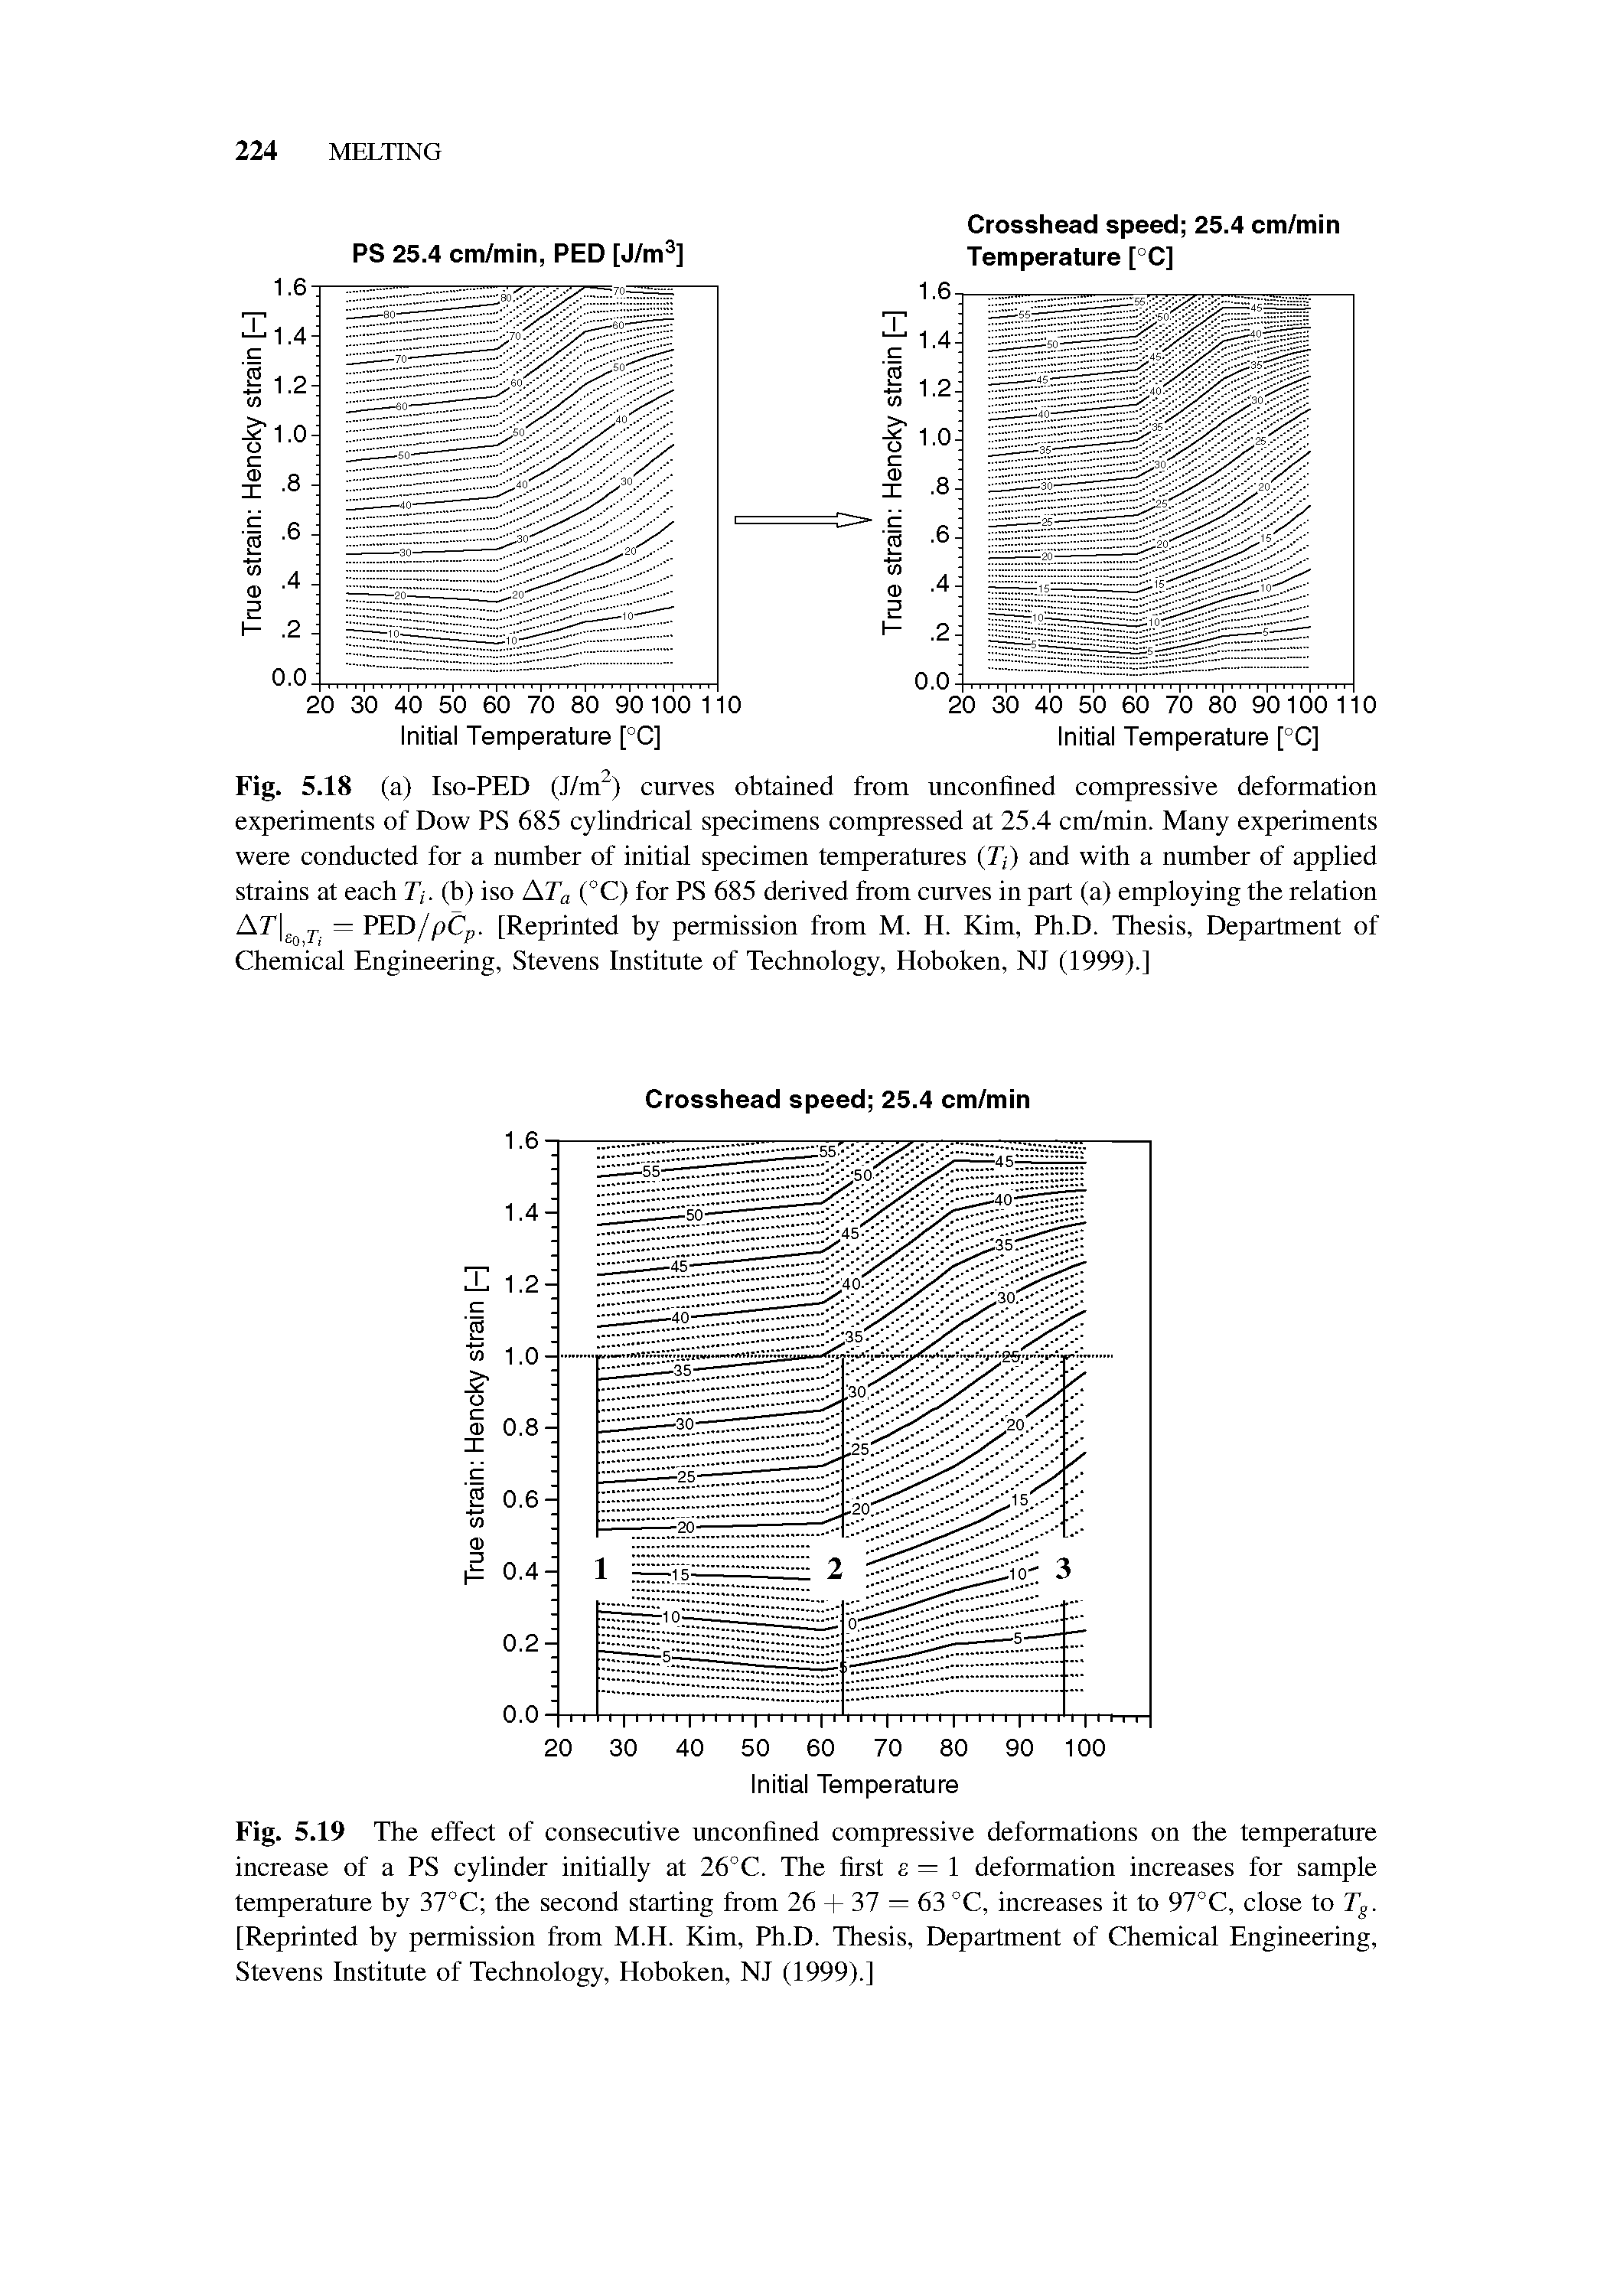 Fig. 5.19 The effect of consecutive unconfined compressive deformations on the temperature increase of a PS cylinder initially at 26°C. The first s — 1 deformation increases for sample temperature by 37°C the second starting from 26 + 37 = 63 °C, increases it to 97°C, close to Tg. [Reprinted by permission from M.H. Kim, Ph.D. Thesis, Department of Chemical Engineering, Stevens Institute of Technology, Hoboken, NJ (1999).]...